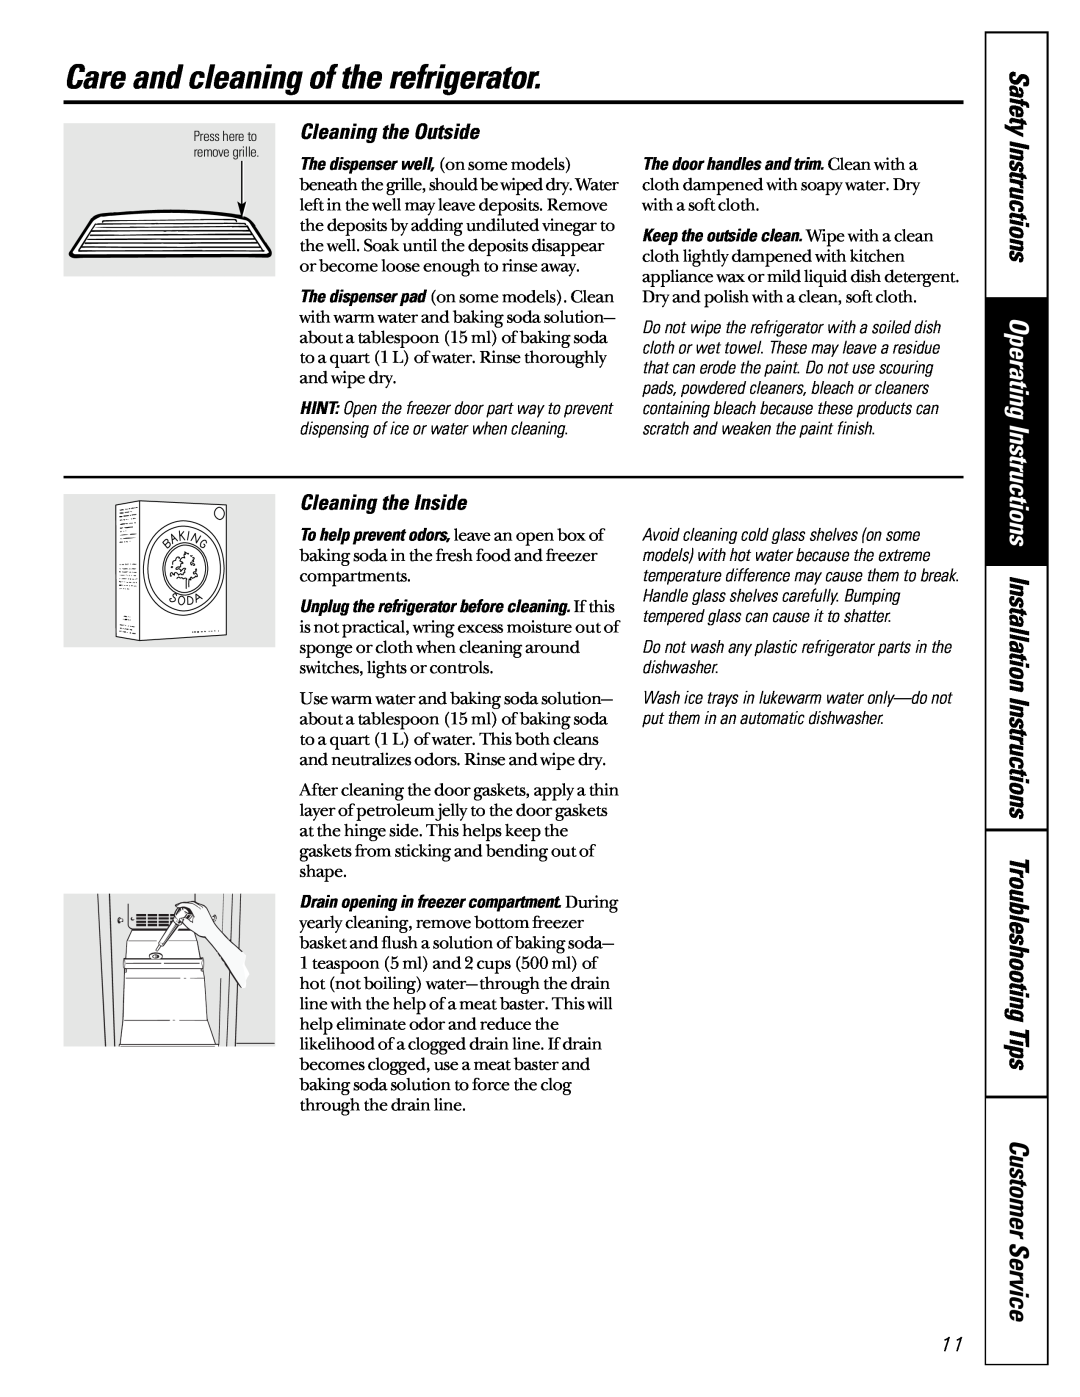 GE 162D6733P007 Care and cleaning of the refrigerator, Installation Instructions Troubleshooting Tips, Cleaning the Inside 